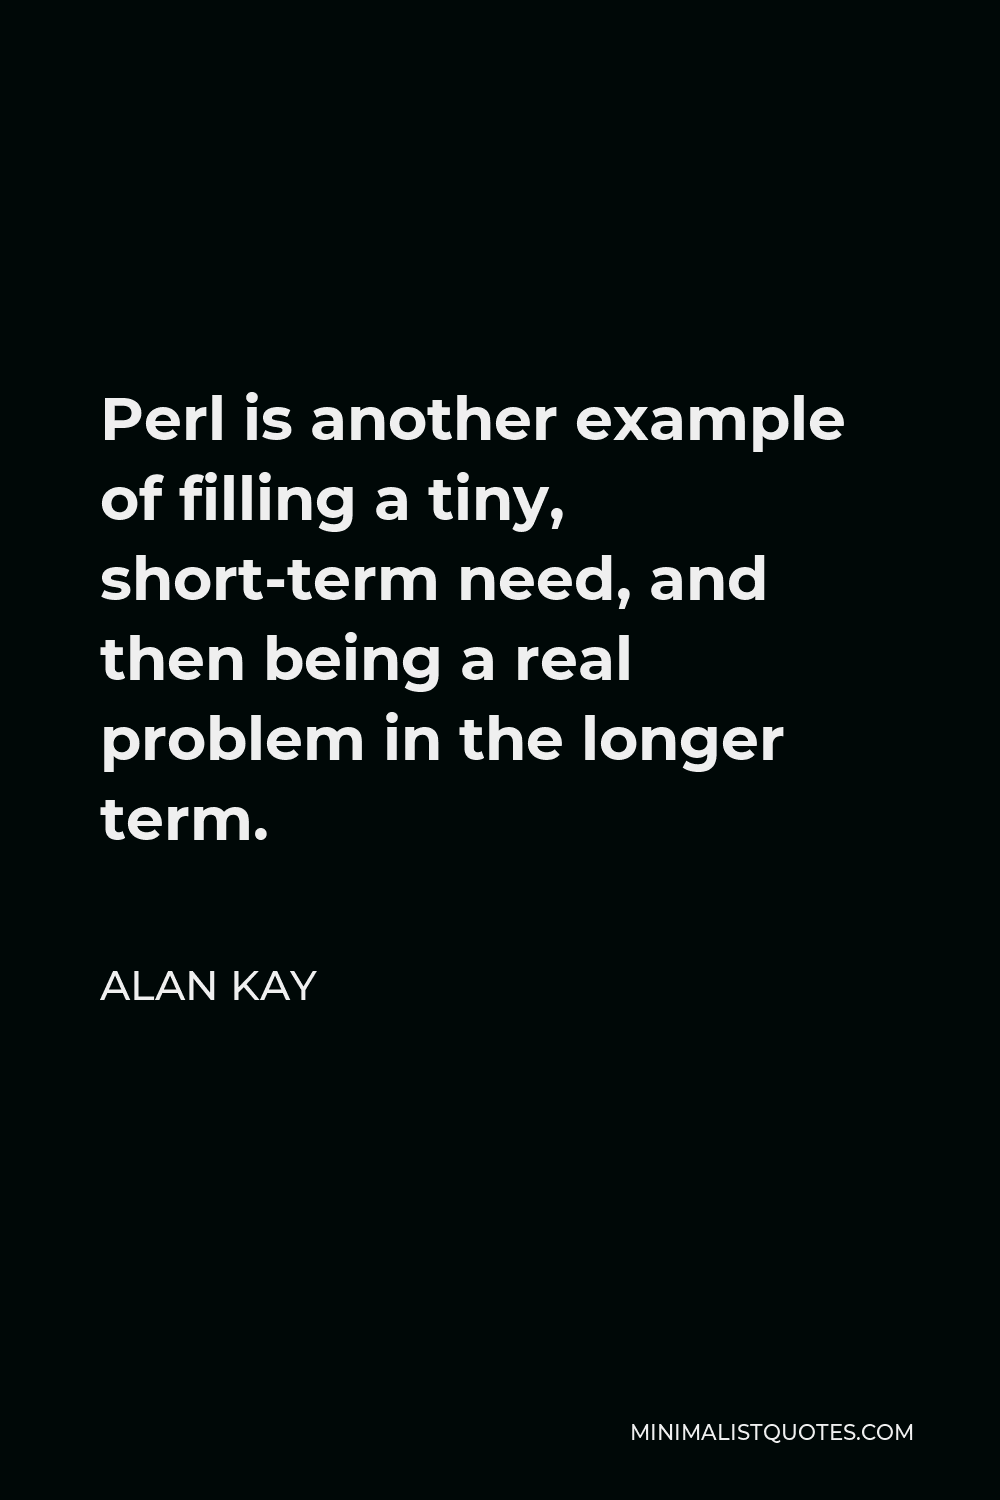 Alan Kay Quote - Perl is another example of filling a tiny, short-term need, and then being a real problem in the longer term.